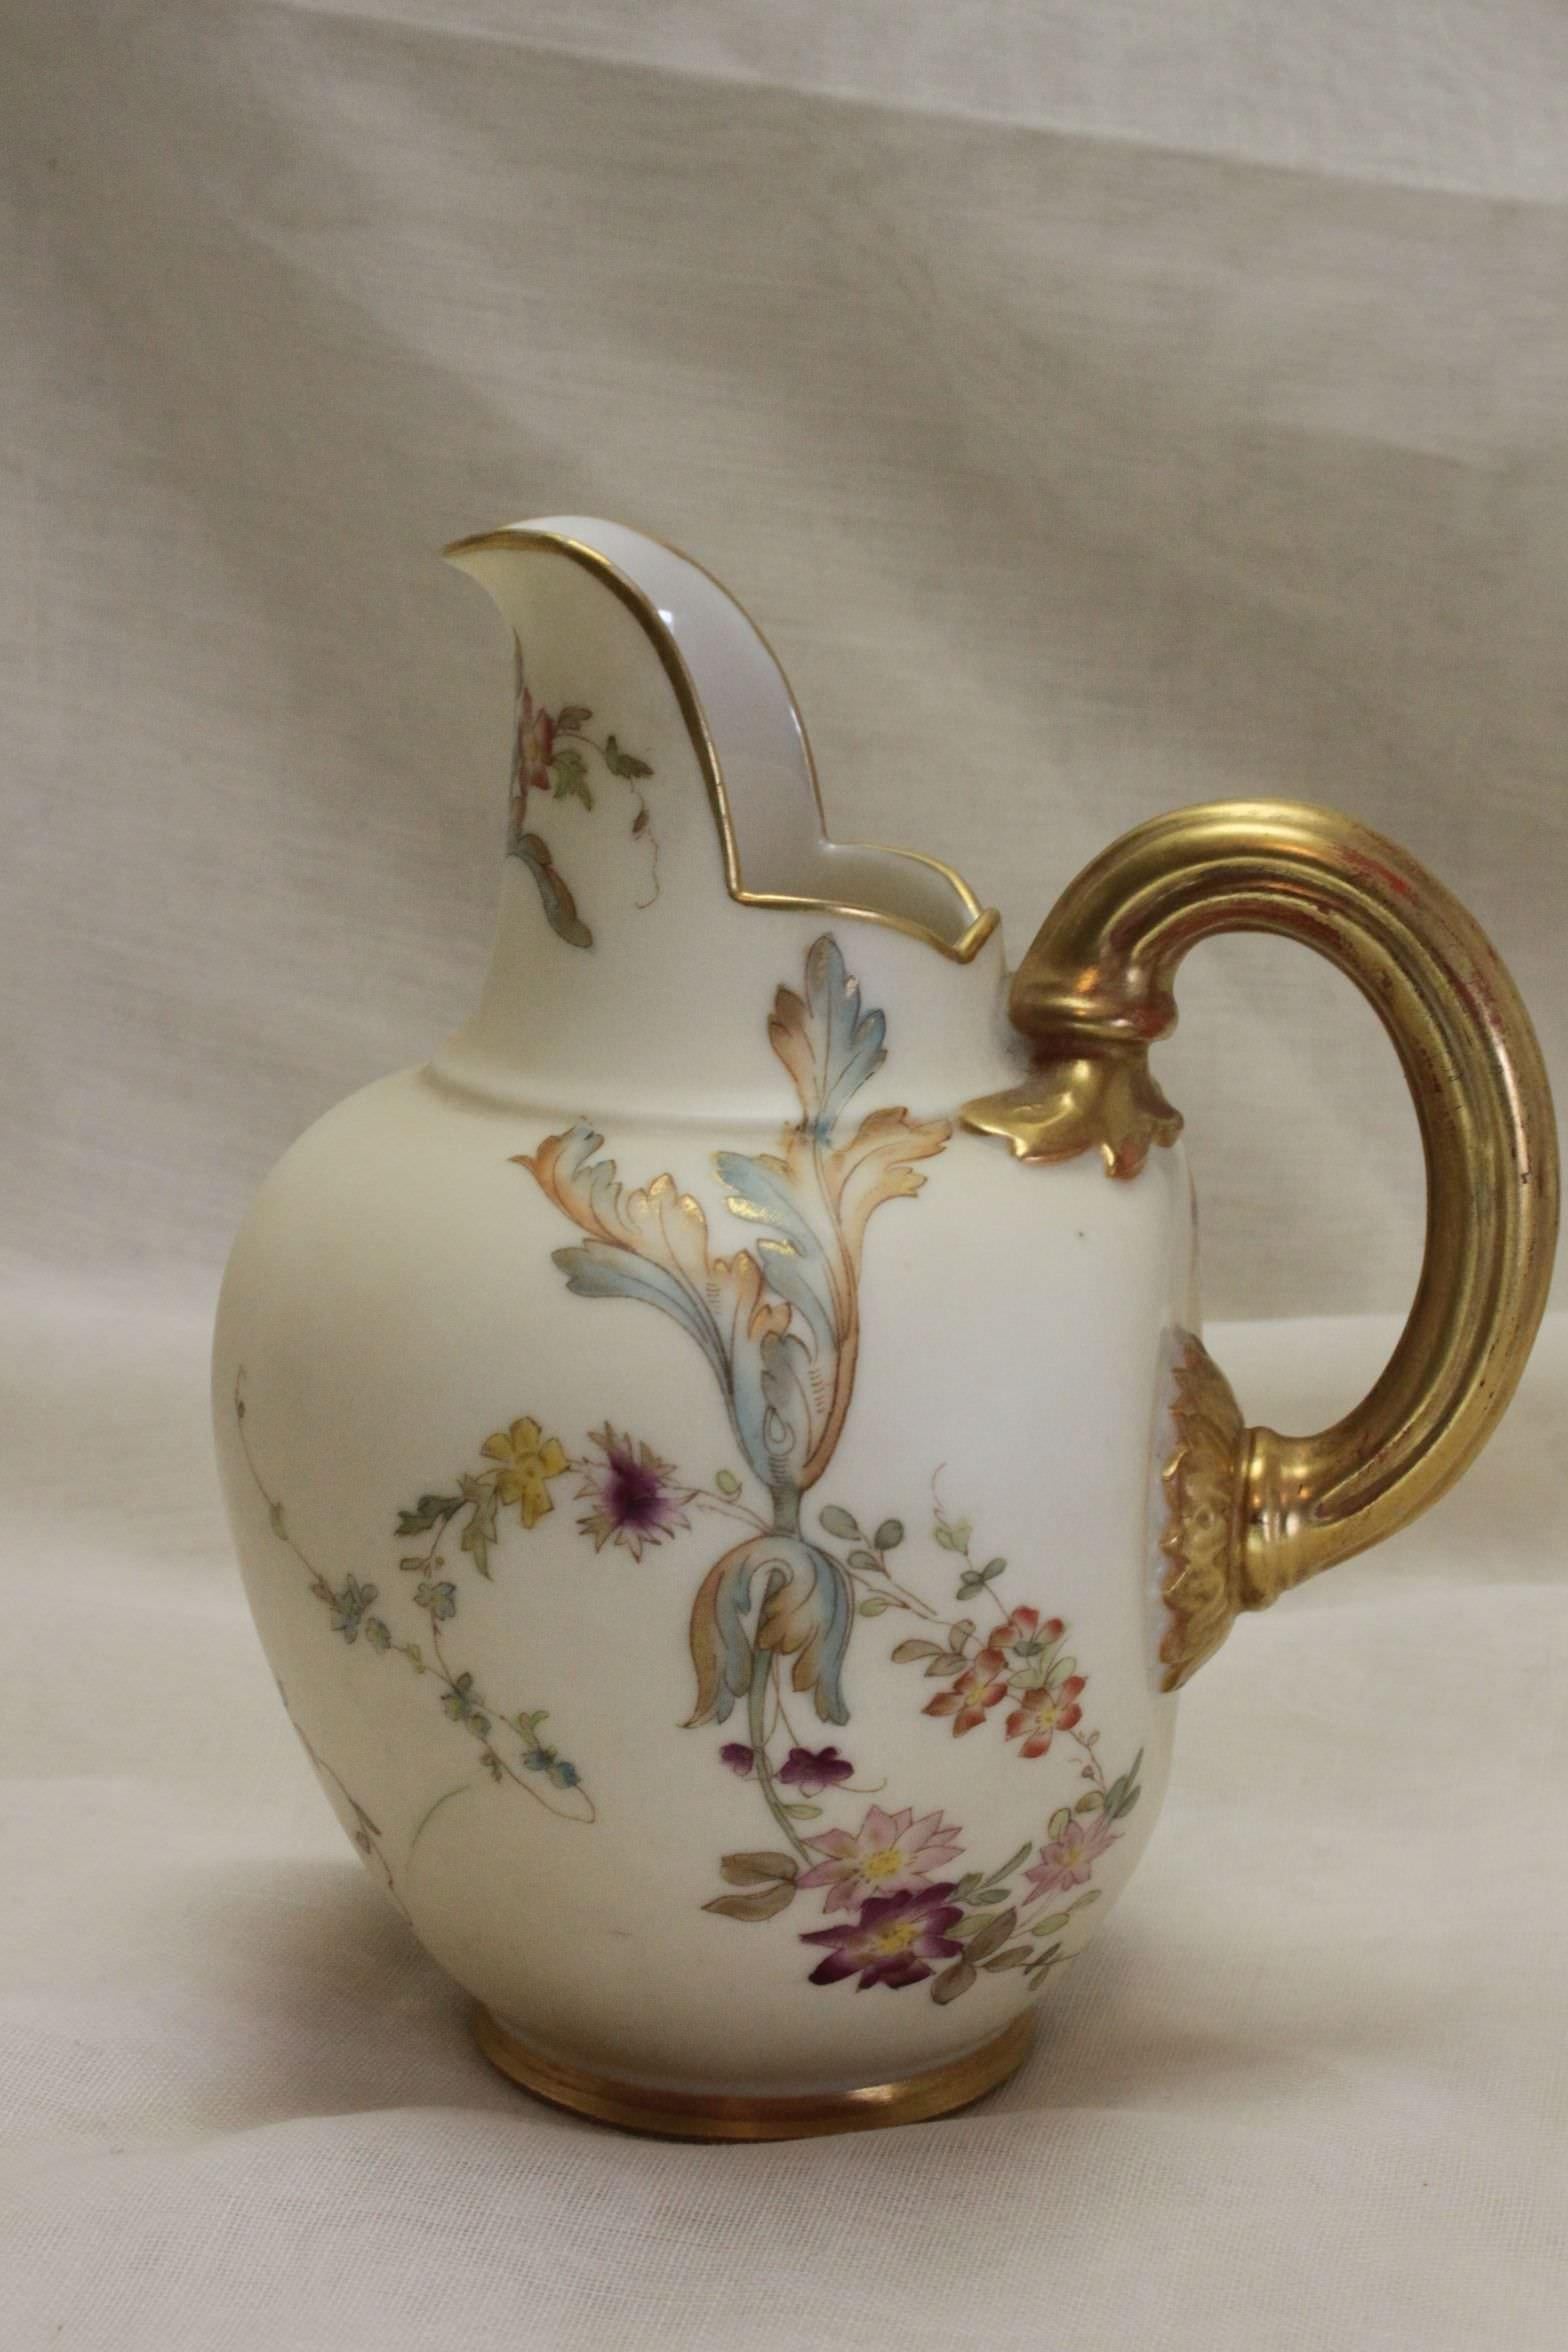 This small Royal Worcester jug is decorated with a rather unusual hand coloured and gilded pattern on a blush ivory ground. The pattern consists of scattered floral sprays that have been coloured using a delicate, restrained palette. The jug shape